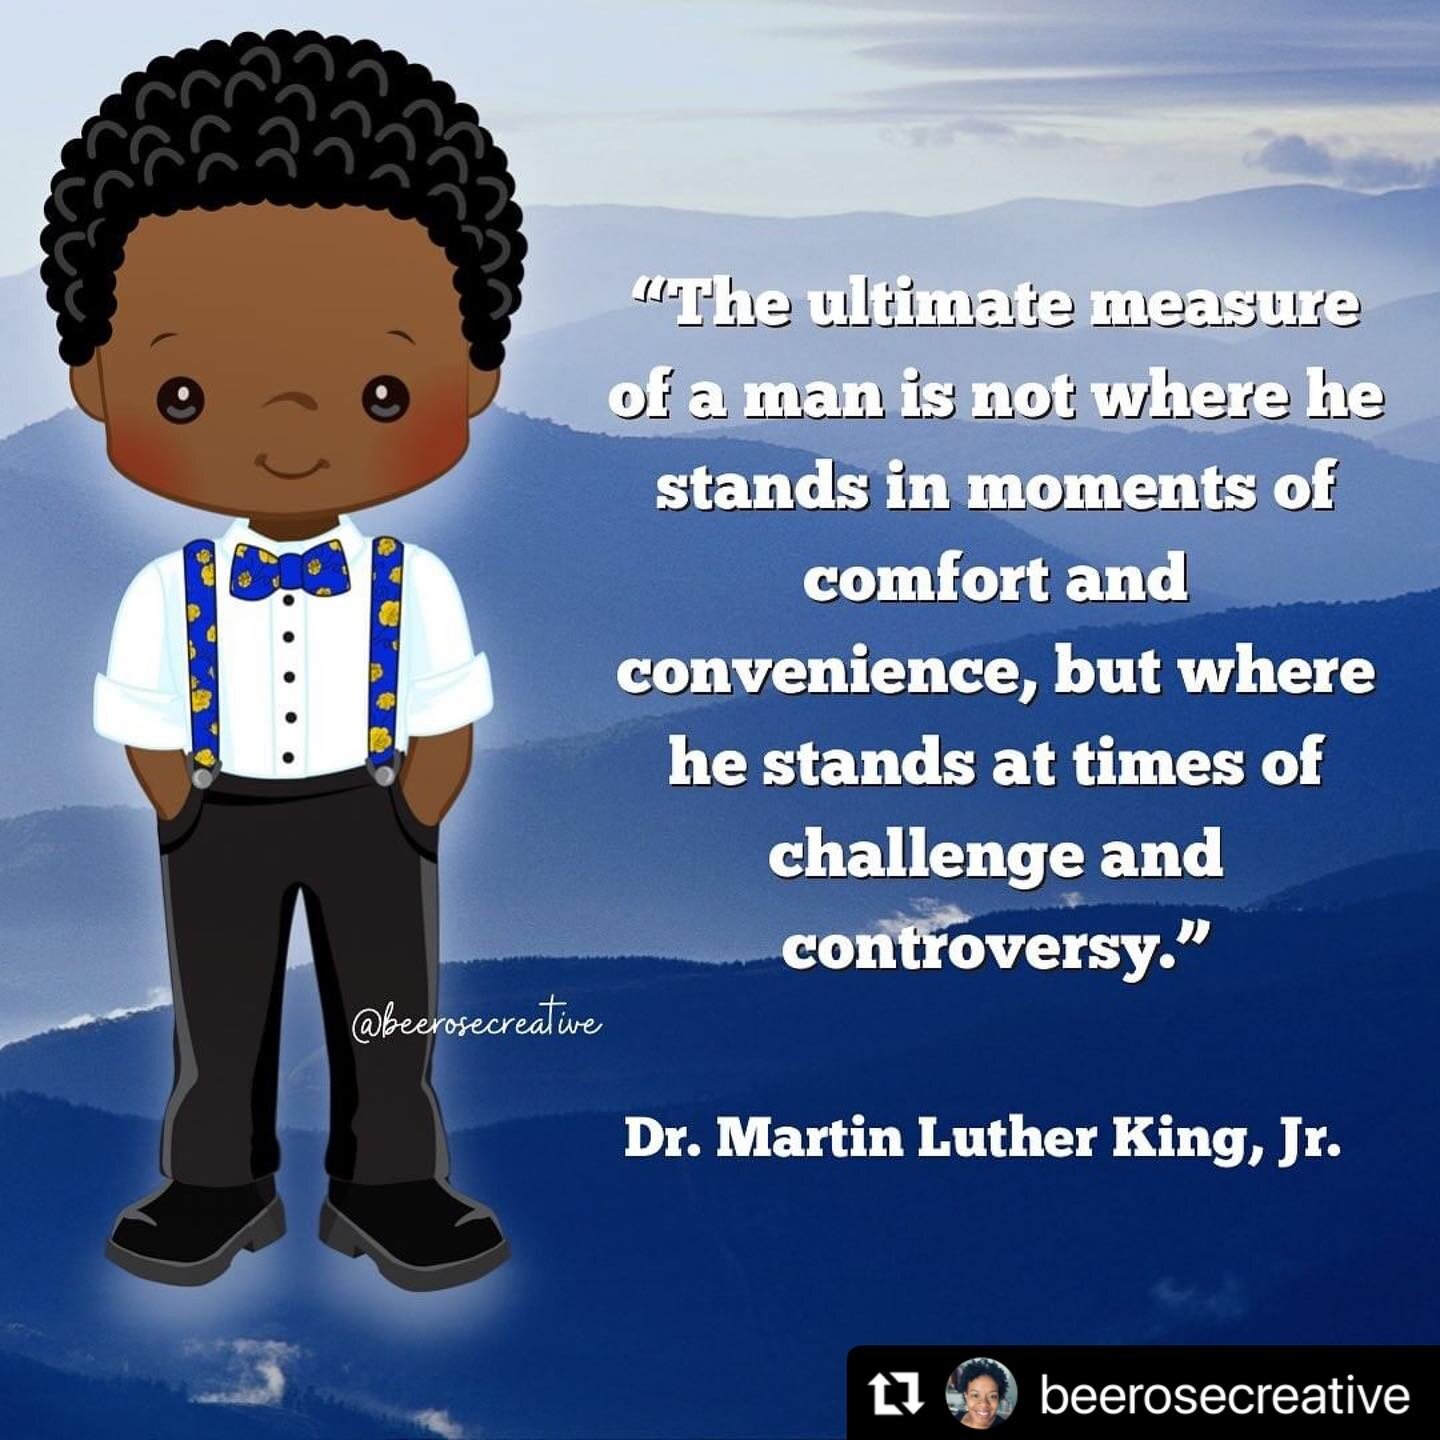 Happy Martin Luther King Jr. Day!
.
.
#service #unity 
.
.
#Repost @beerosecreative with @make_repost
・・・
Let us celebrate Dr. King today, not just in words, but in actions&hellip;.not just today, but everyday! 
..
..
#digitalart #digitalartist #digi